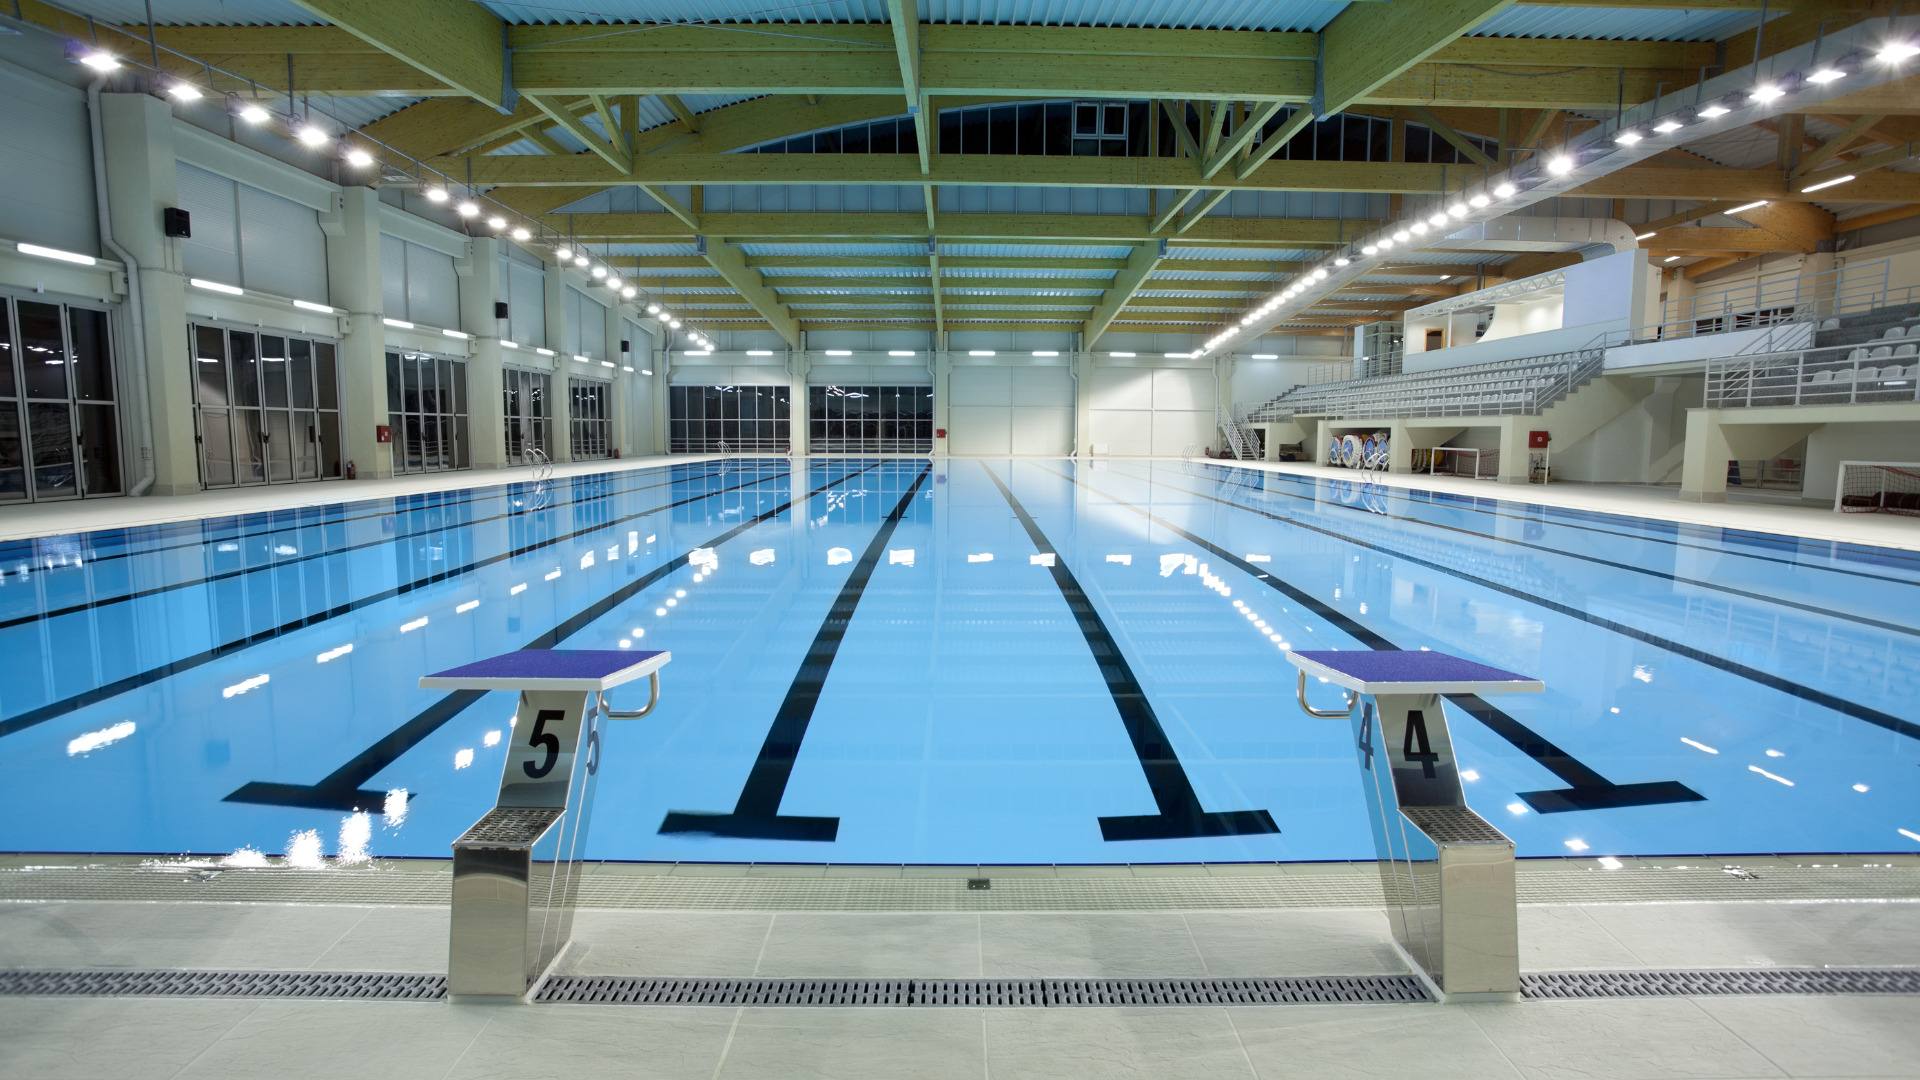 5 Common Risks Aquatic Centers Face and How to Mitigate Them